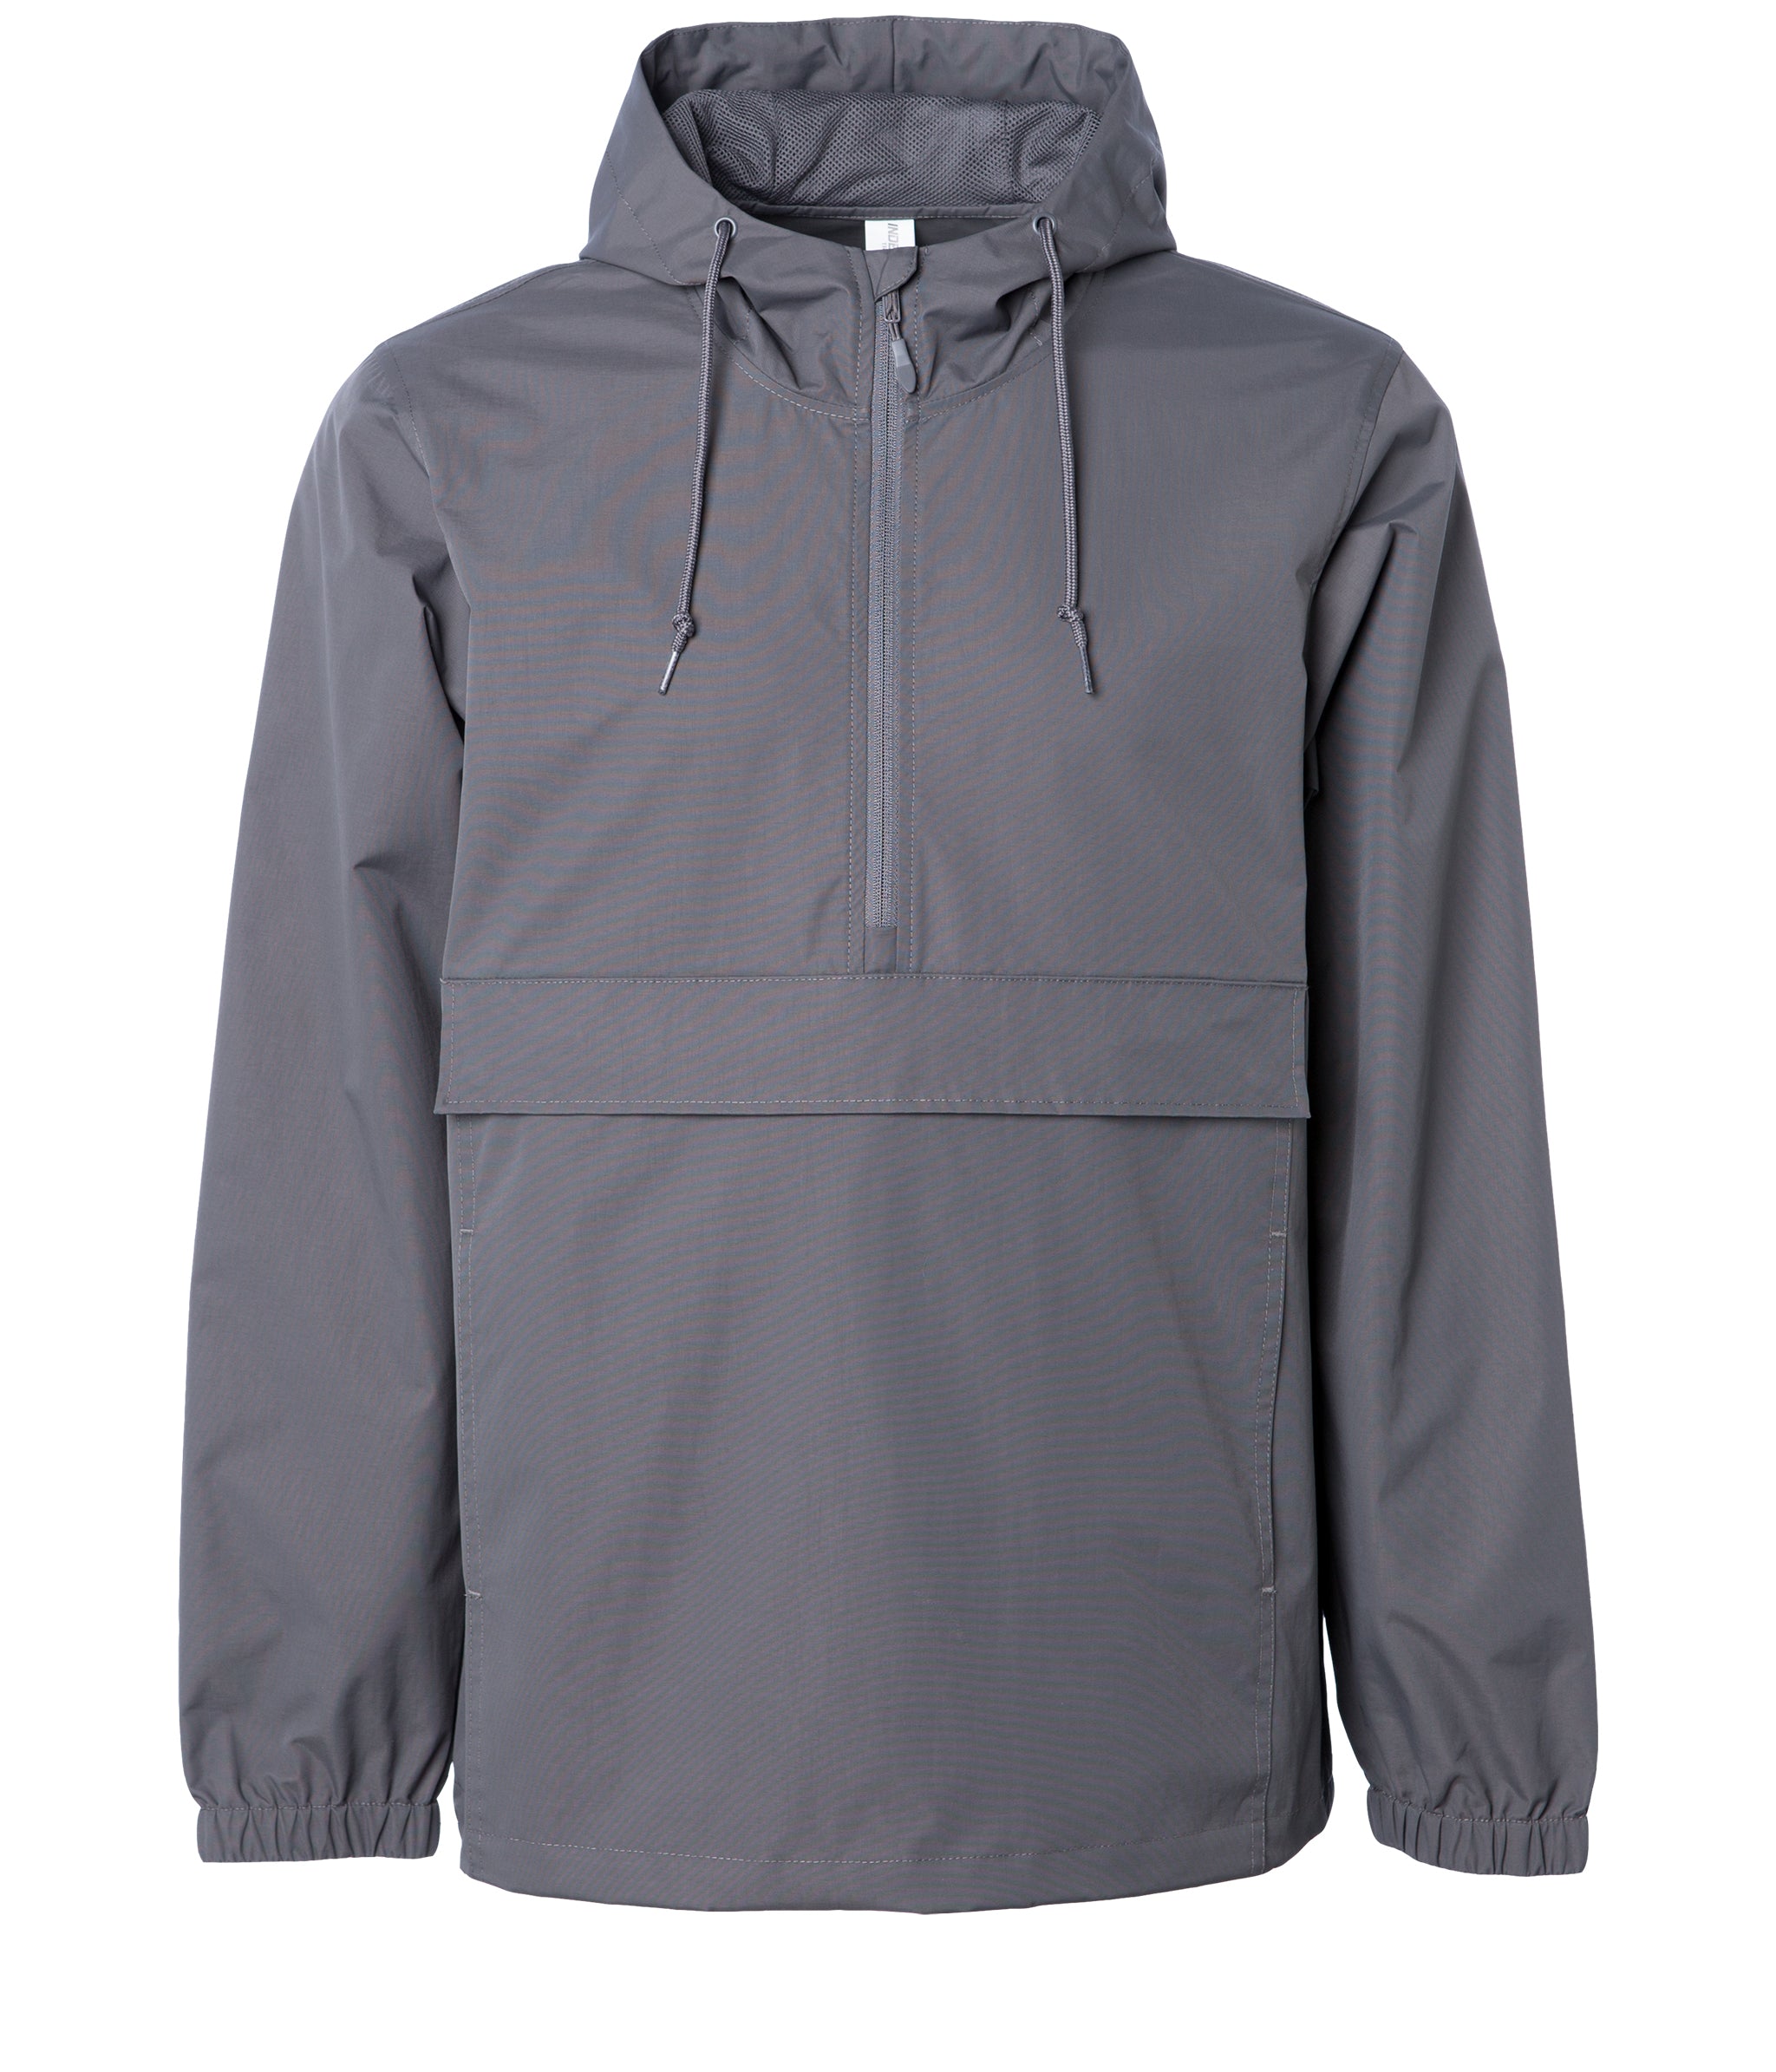 Water Resistant Windbreaker Anorak Jacket Independent Trading Co.  Independent Trading Company